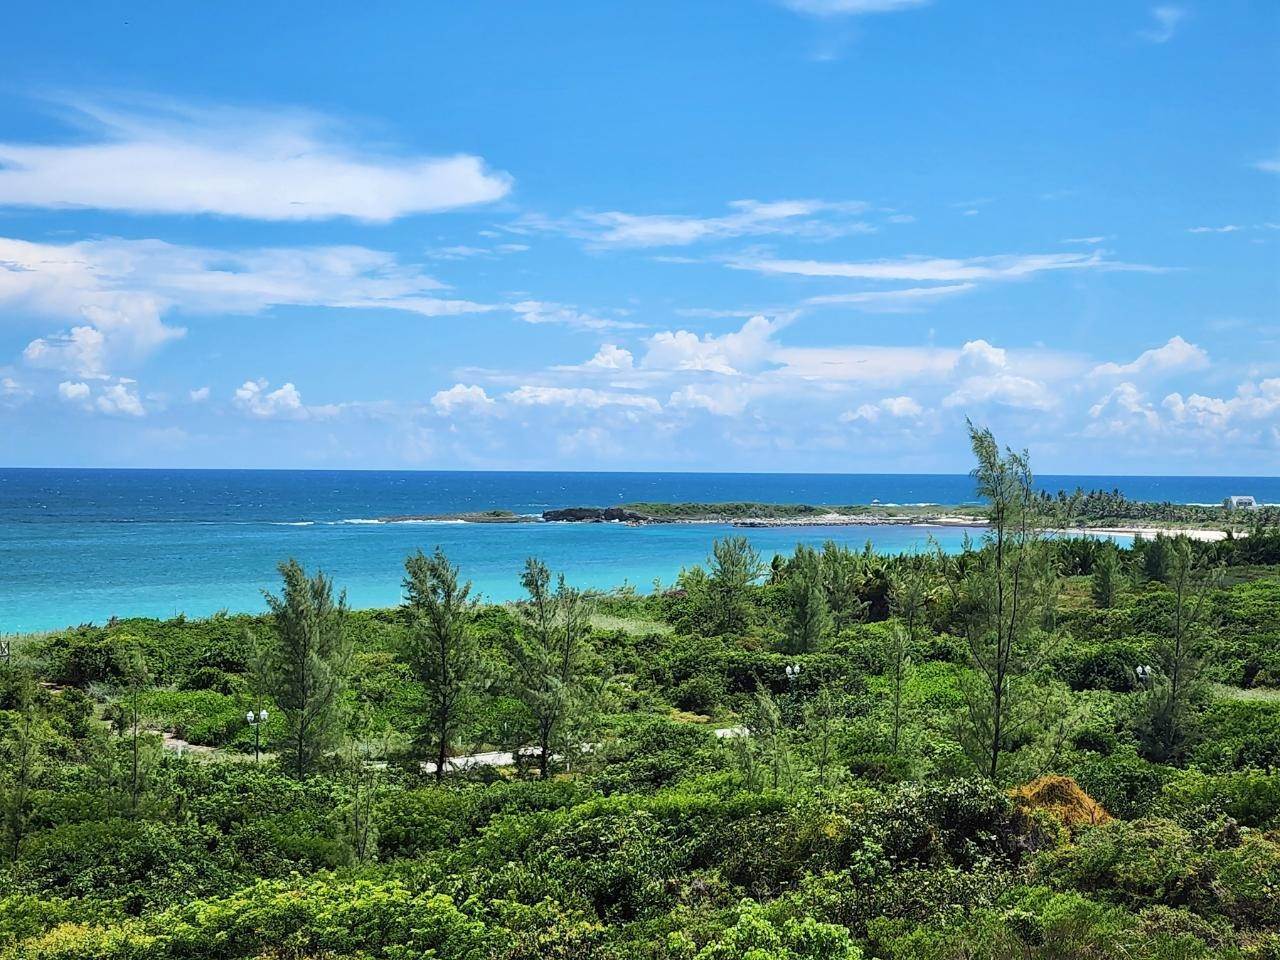 20. Lots / Acreage for Sale at Coopers Town, Abaco, Bahamas